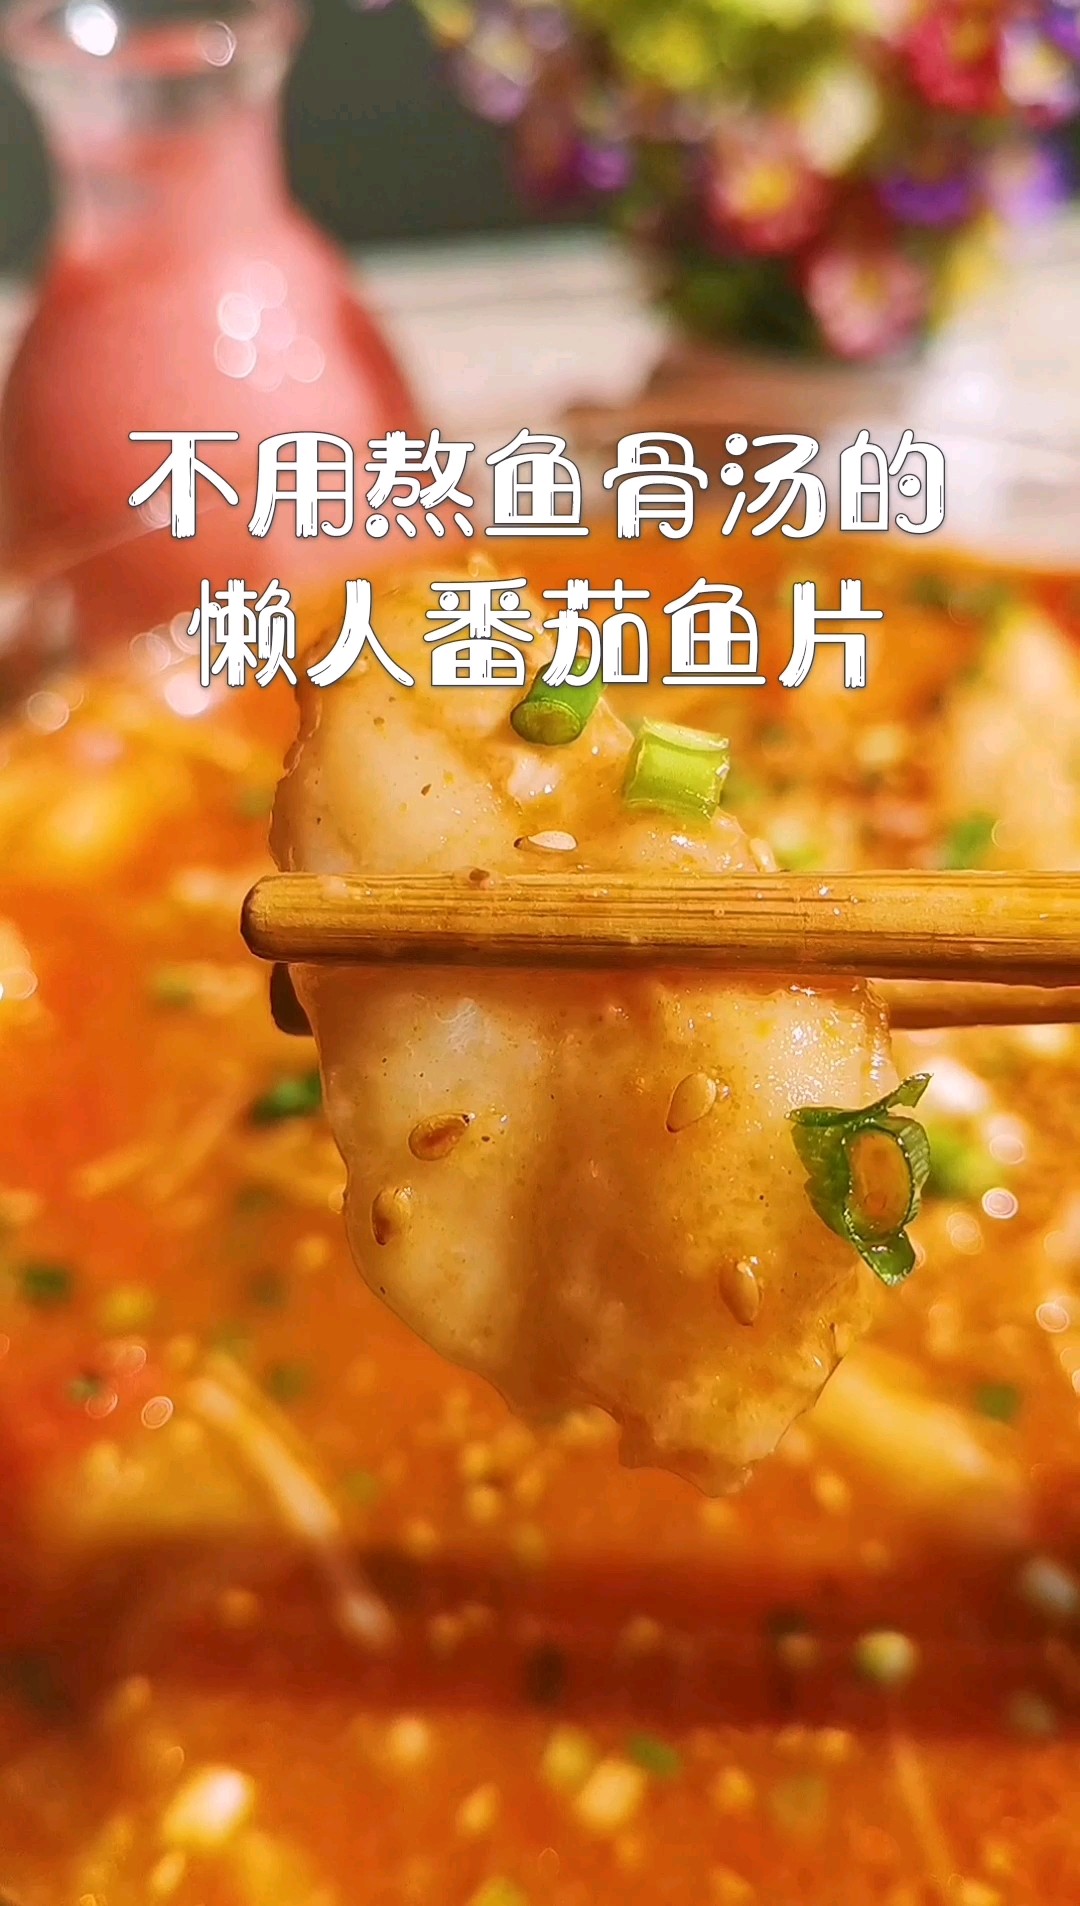 No Need to Boil Fish Bone Soup, You Can Also Make Lazy Soup with Fresh Flavor